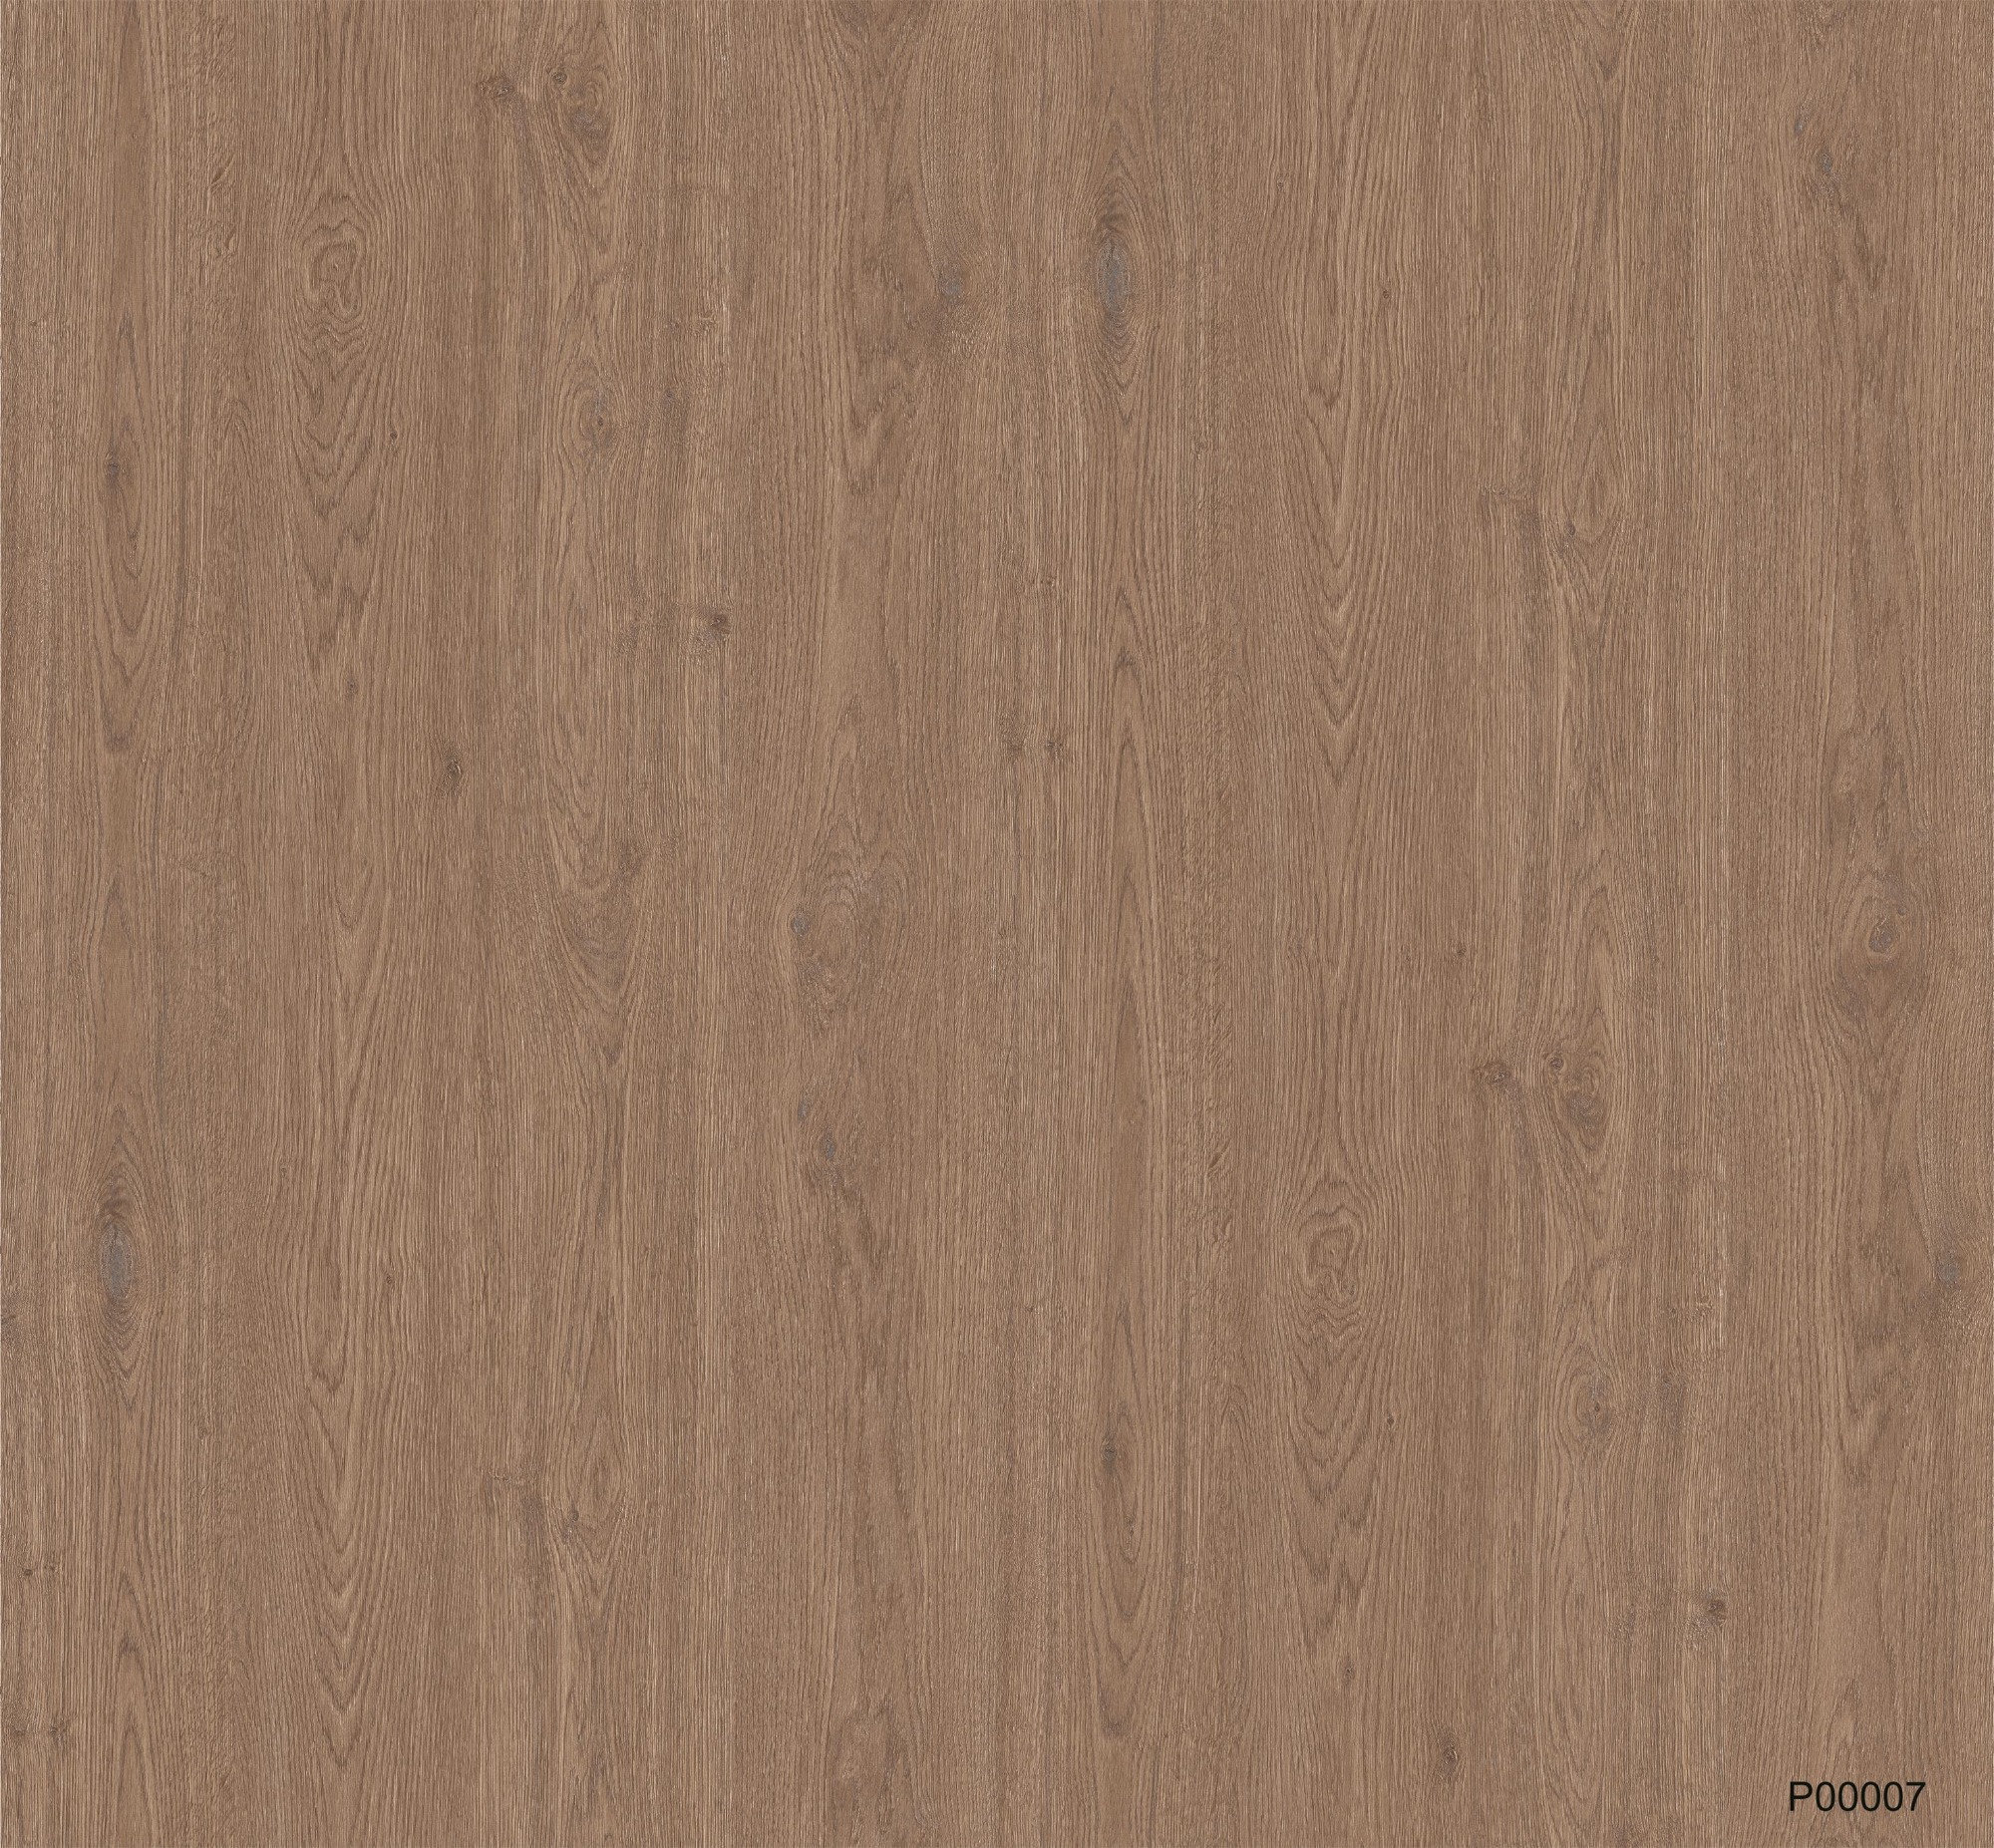 H00007 Melamine paper with wood grain